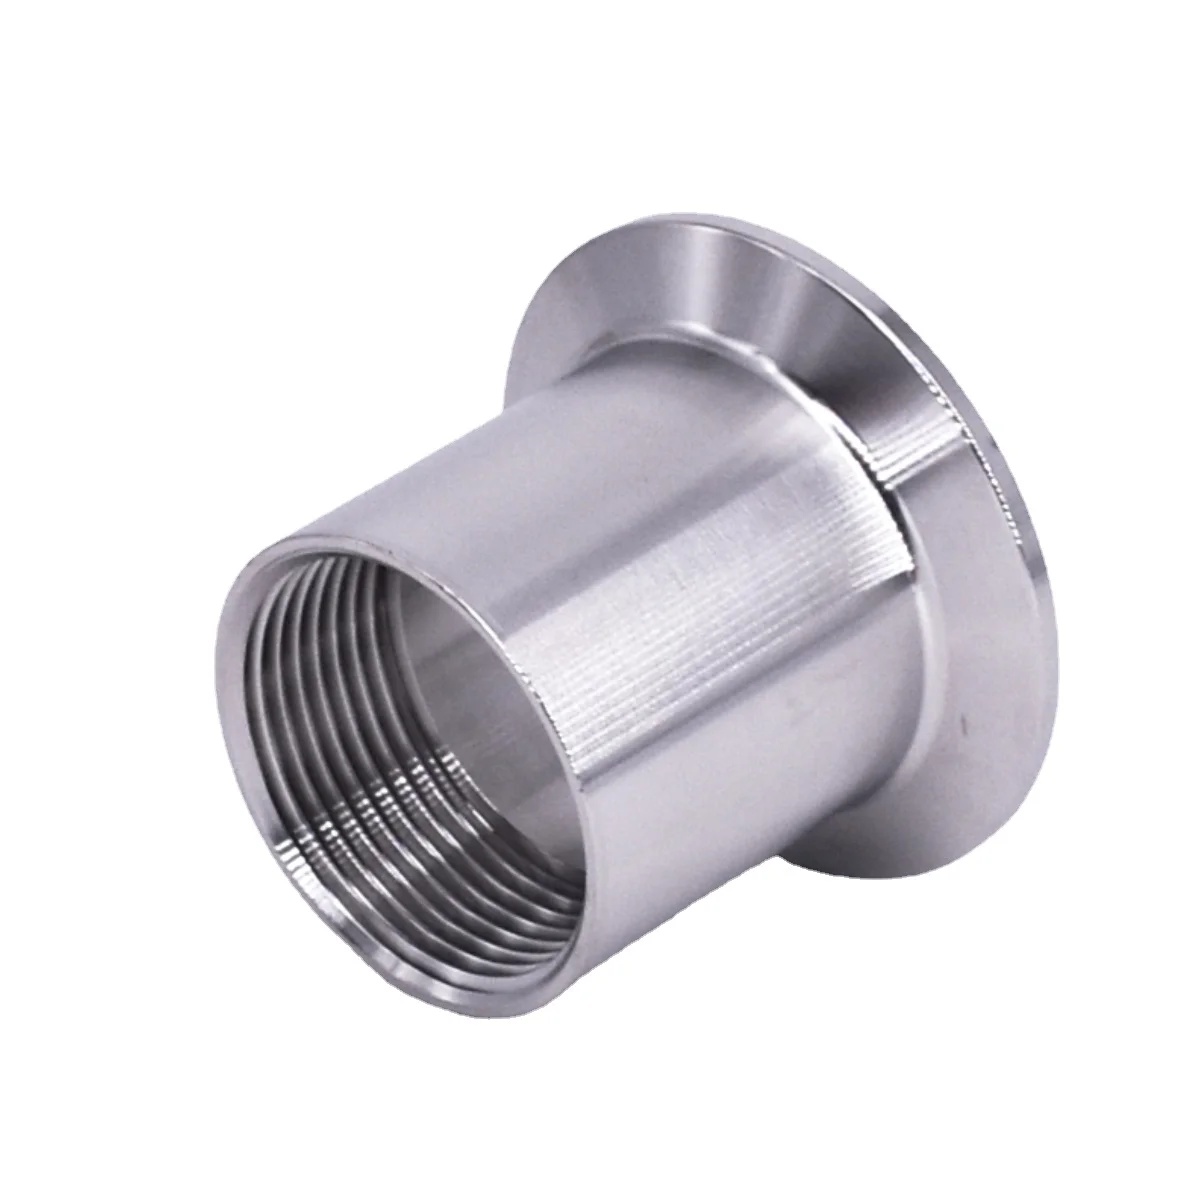 3/4" Sanitary Female Threaded NPT Ferrule Pipe Fitting to 1.5" Tri Clamp  SUS316 